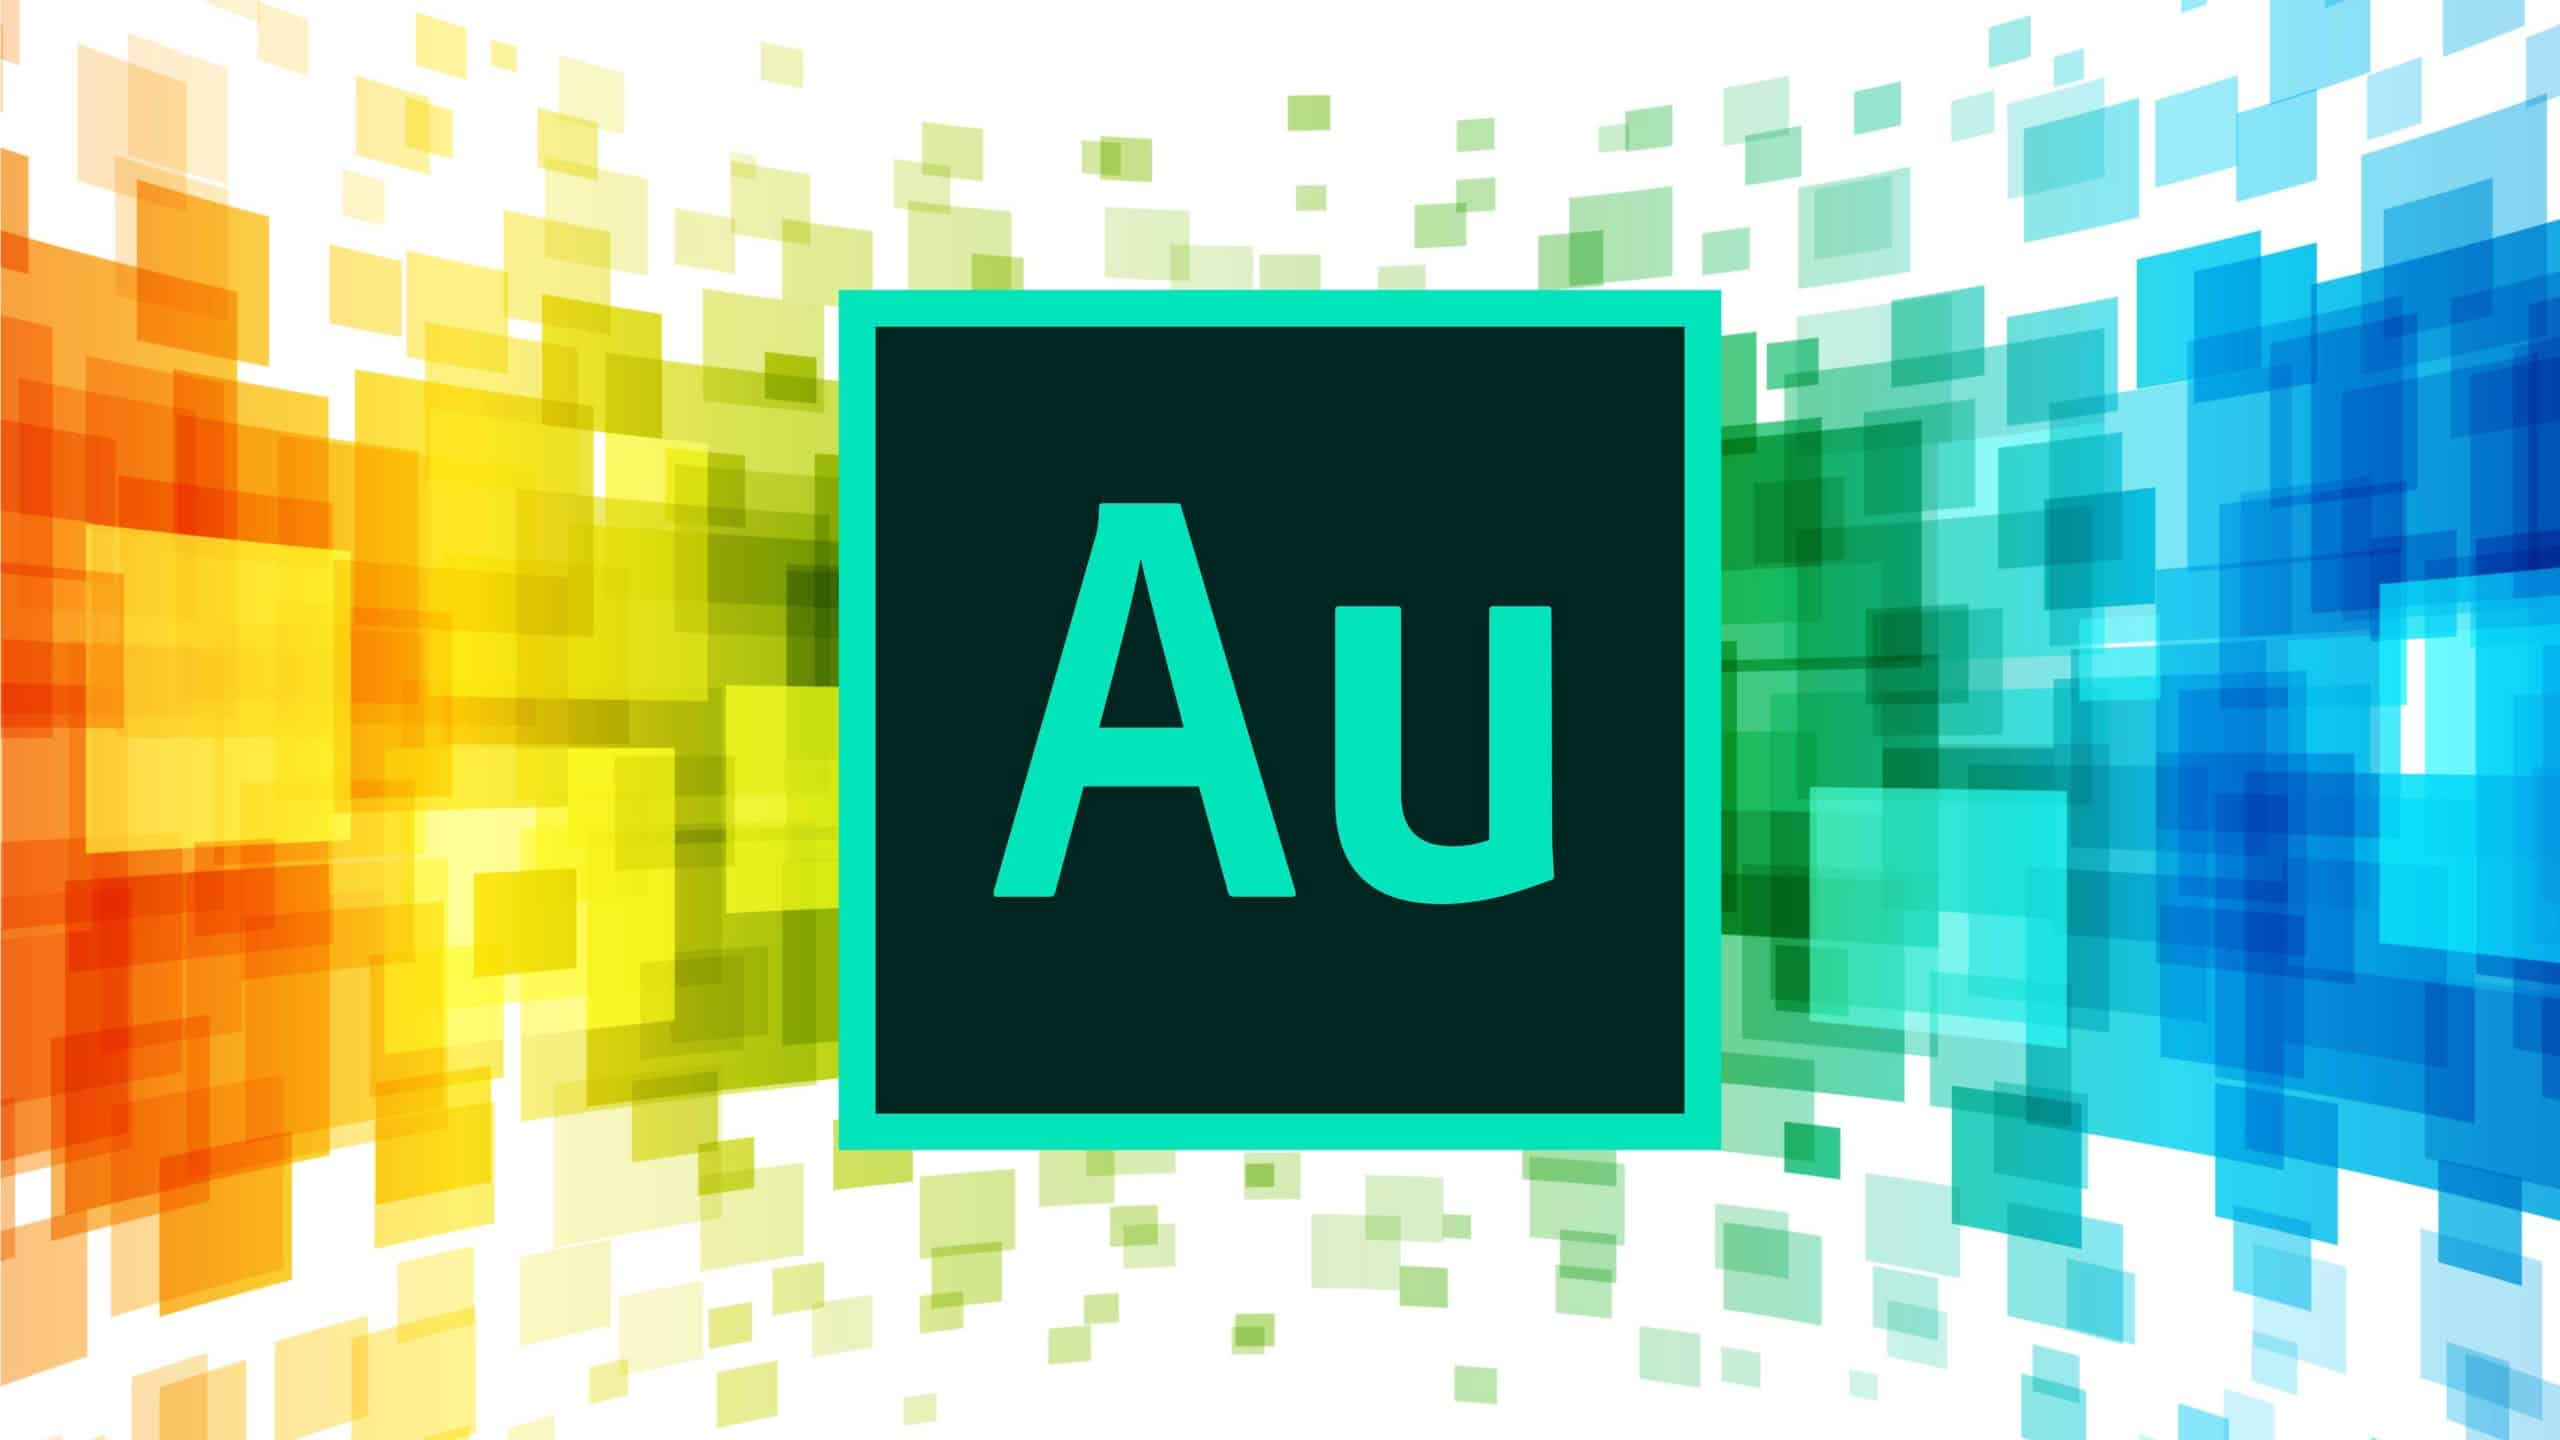 adobe audition podcast workflow